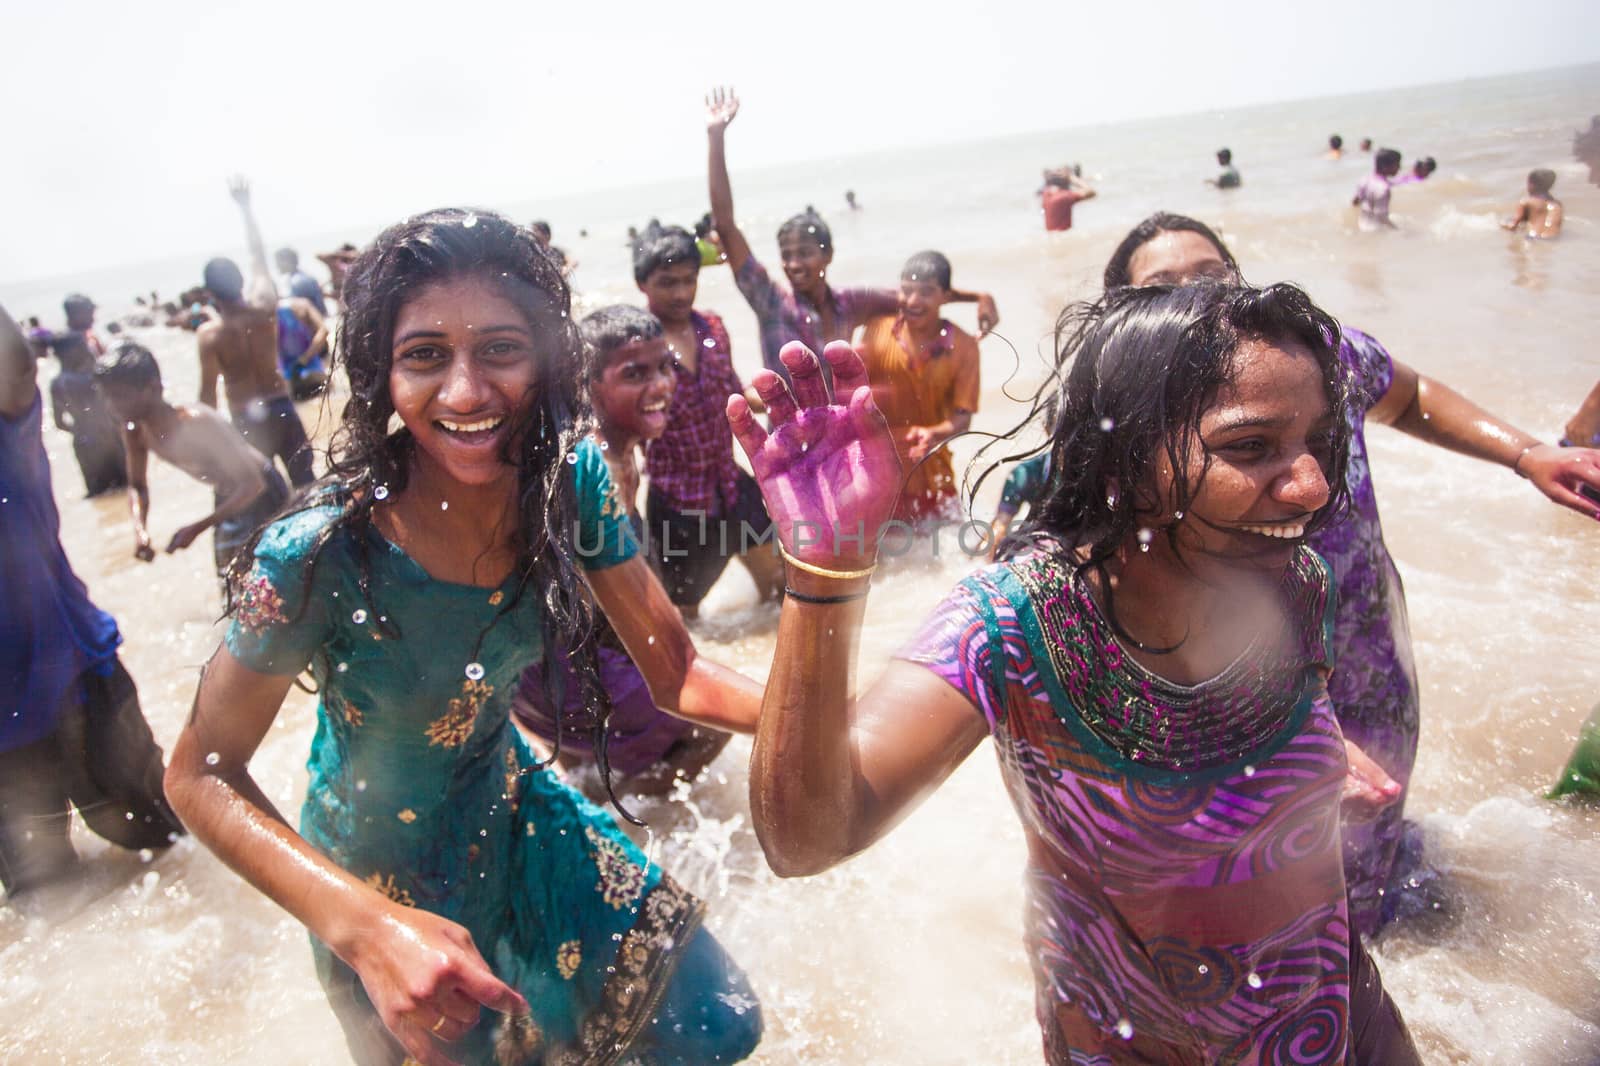 Young girls at Holi celebration in India by Aarstudio